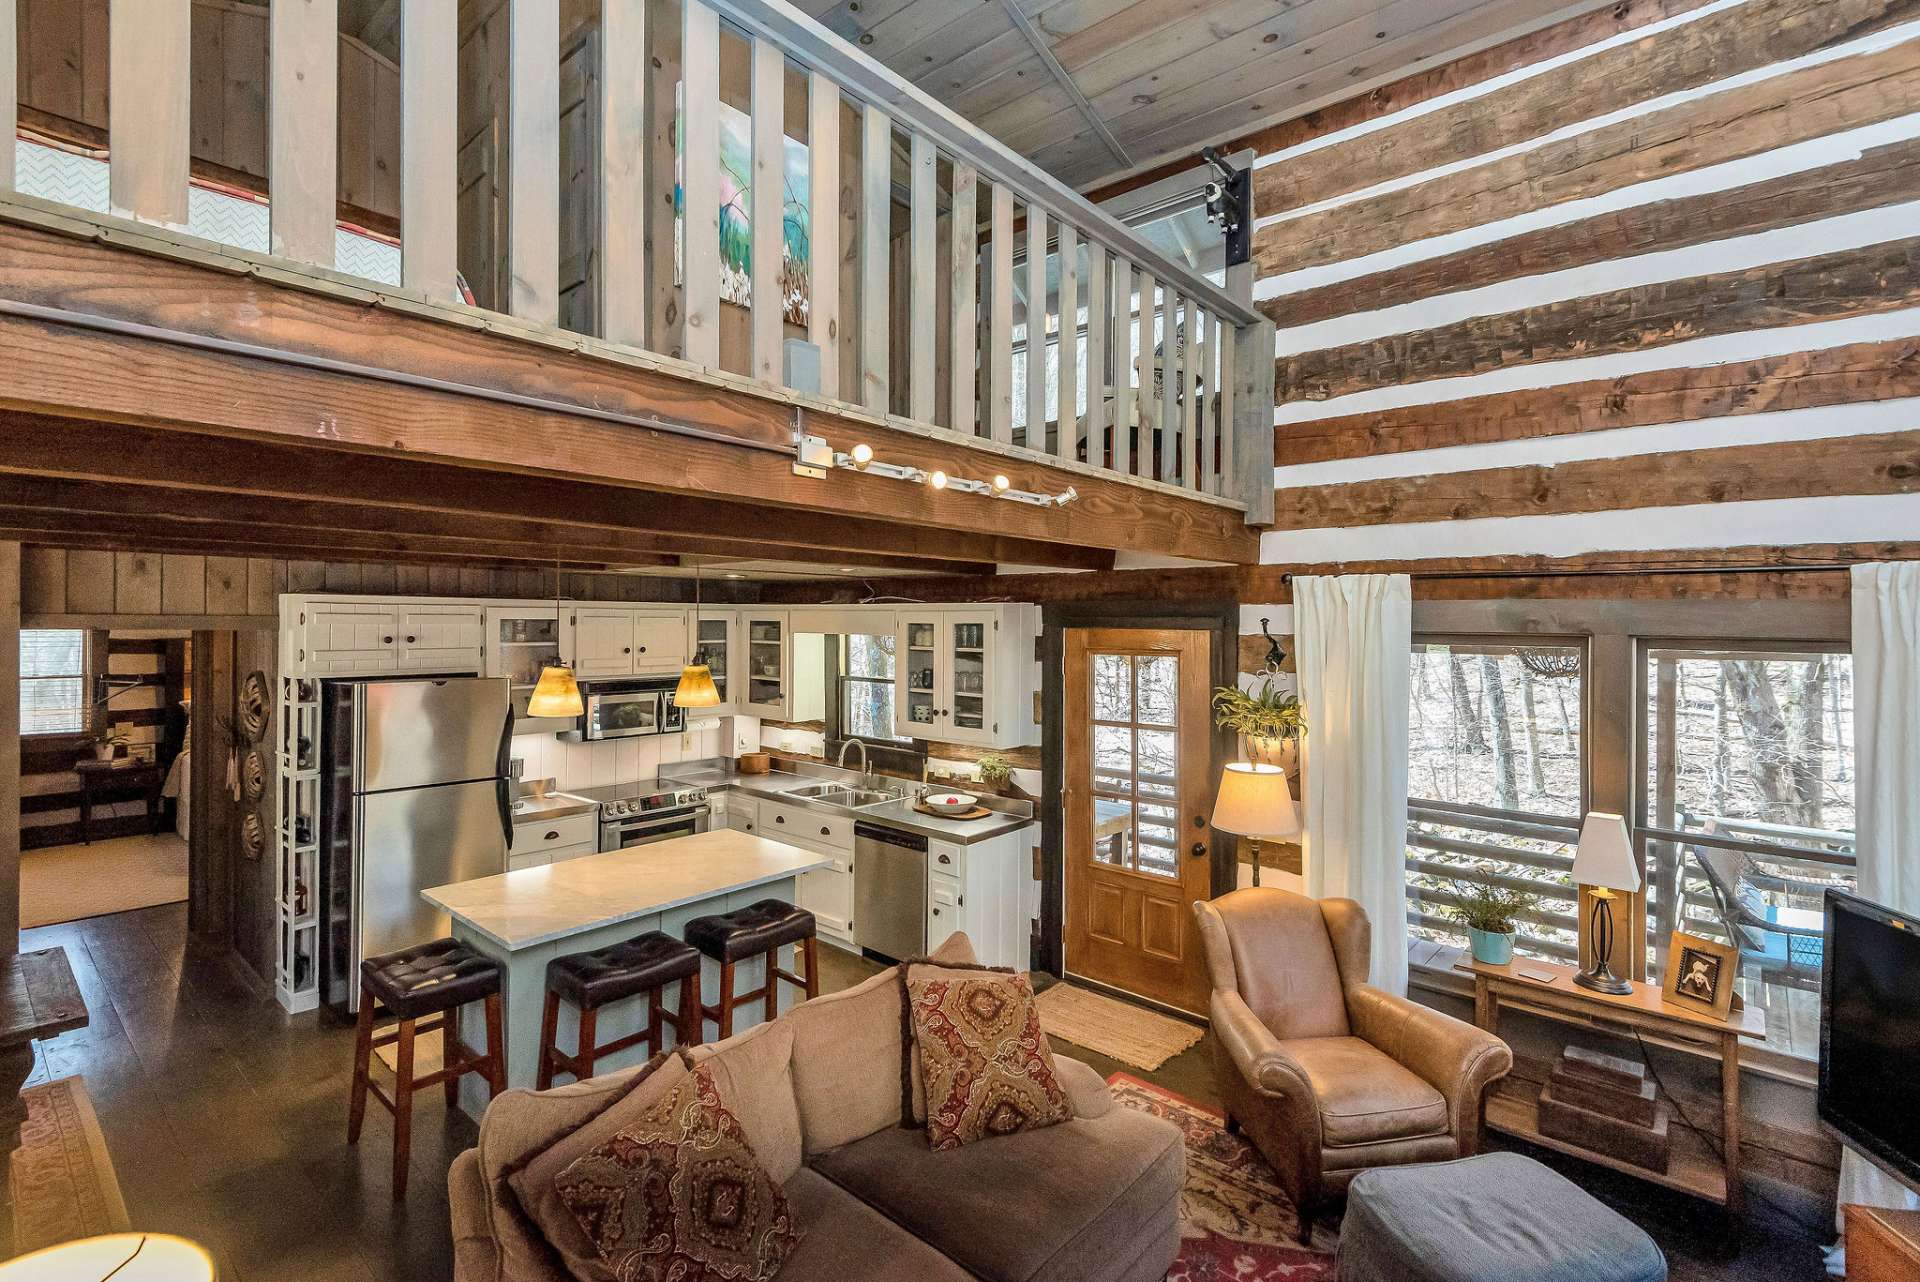 Overall, this great room exudes warmth, comfort, and rustic elegance, making it the perfect gathering place for creating cherished memories in the heart of nature.